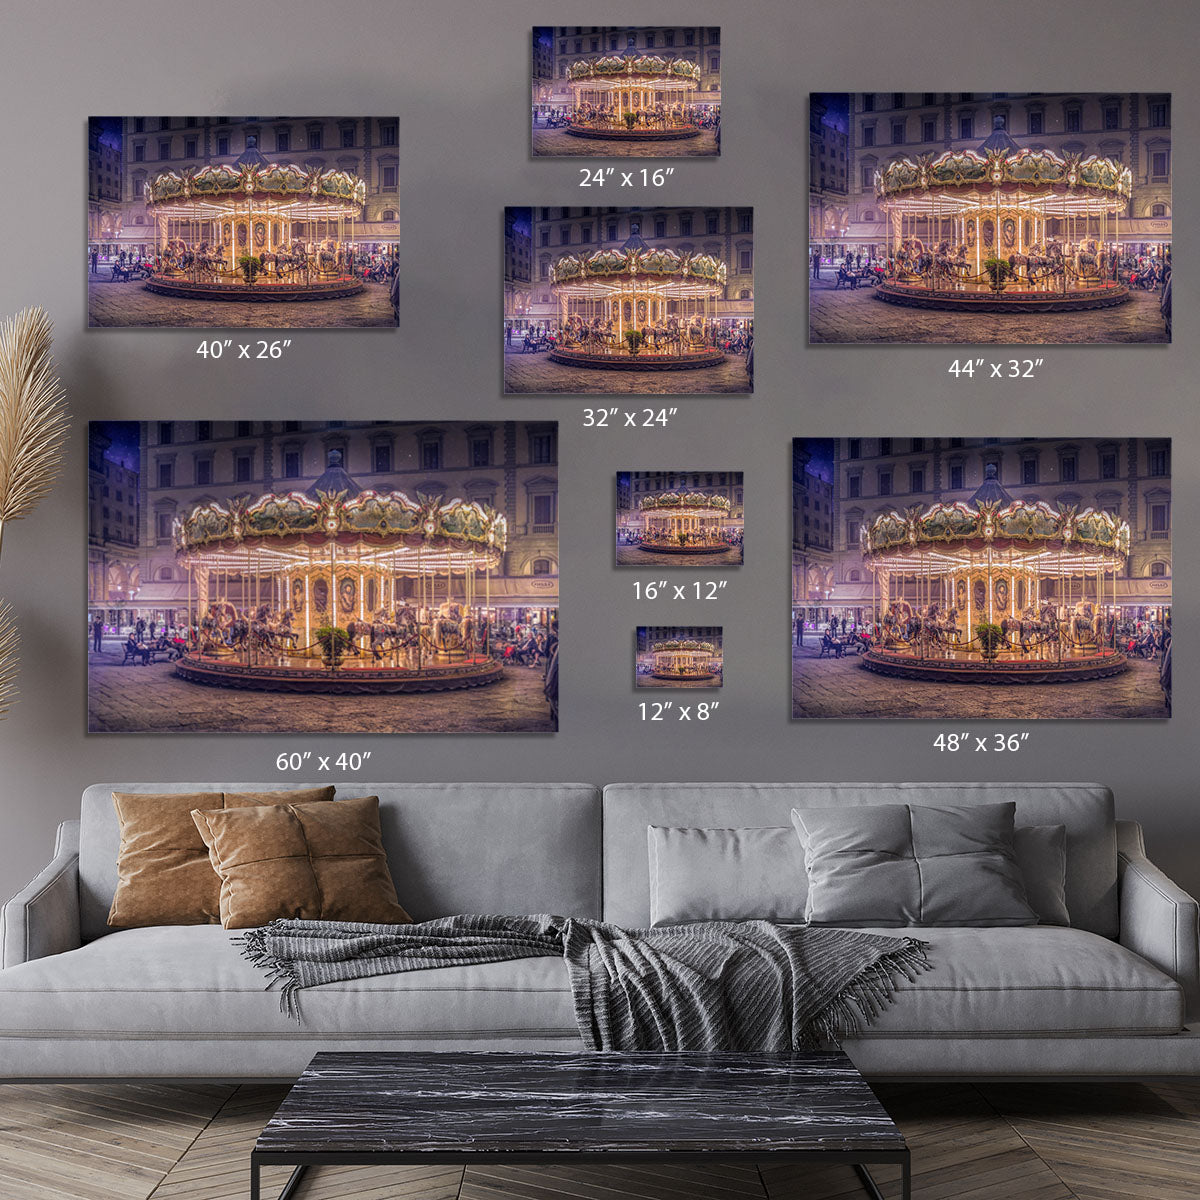 Carousel Canvas Print or Poster - 1x - 7